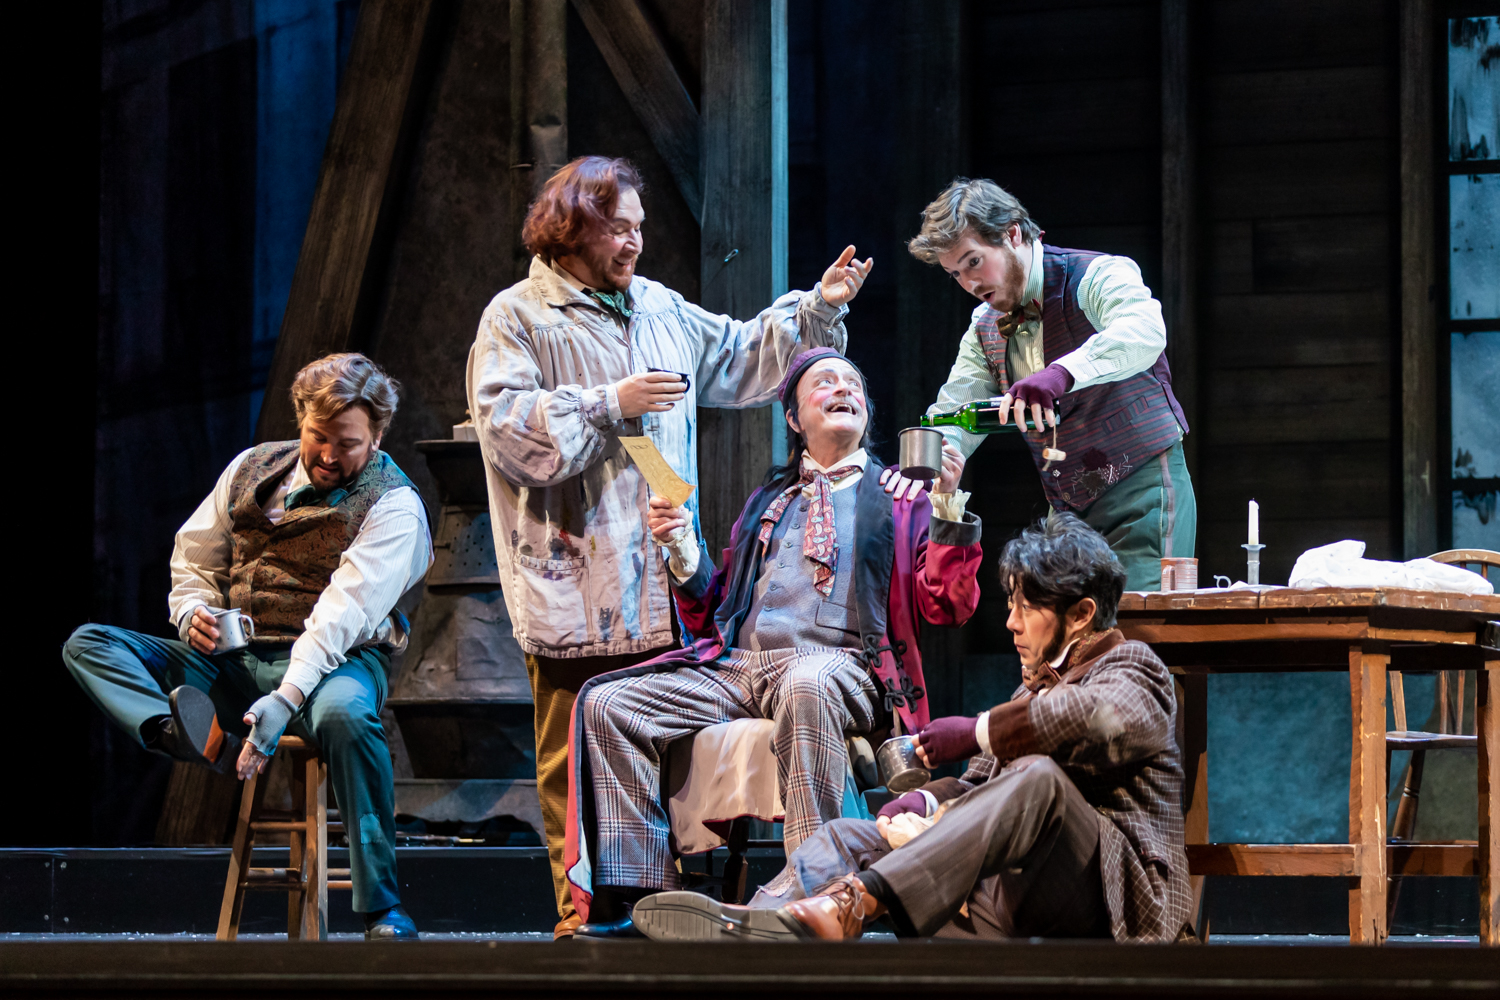 IN REVIEW: (from left to right) tenor SCOTT QUINN as Rdolfo, baritone LEVI HERNANDEZ as Marcello, bass-baritone DONALD HARTMANN as Benoît, baritone TIMOTHY MURRAY as Schaunard, and bass ADAM LAU as Colline in North Carolina Opera's January 2022 production of Giacomo Puccini's LA BOHÈME [Photograph © by Eric Waters Photography]